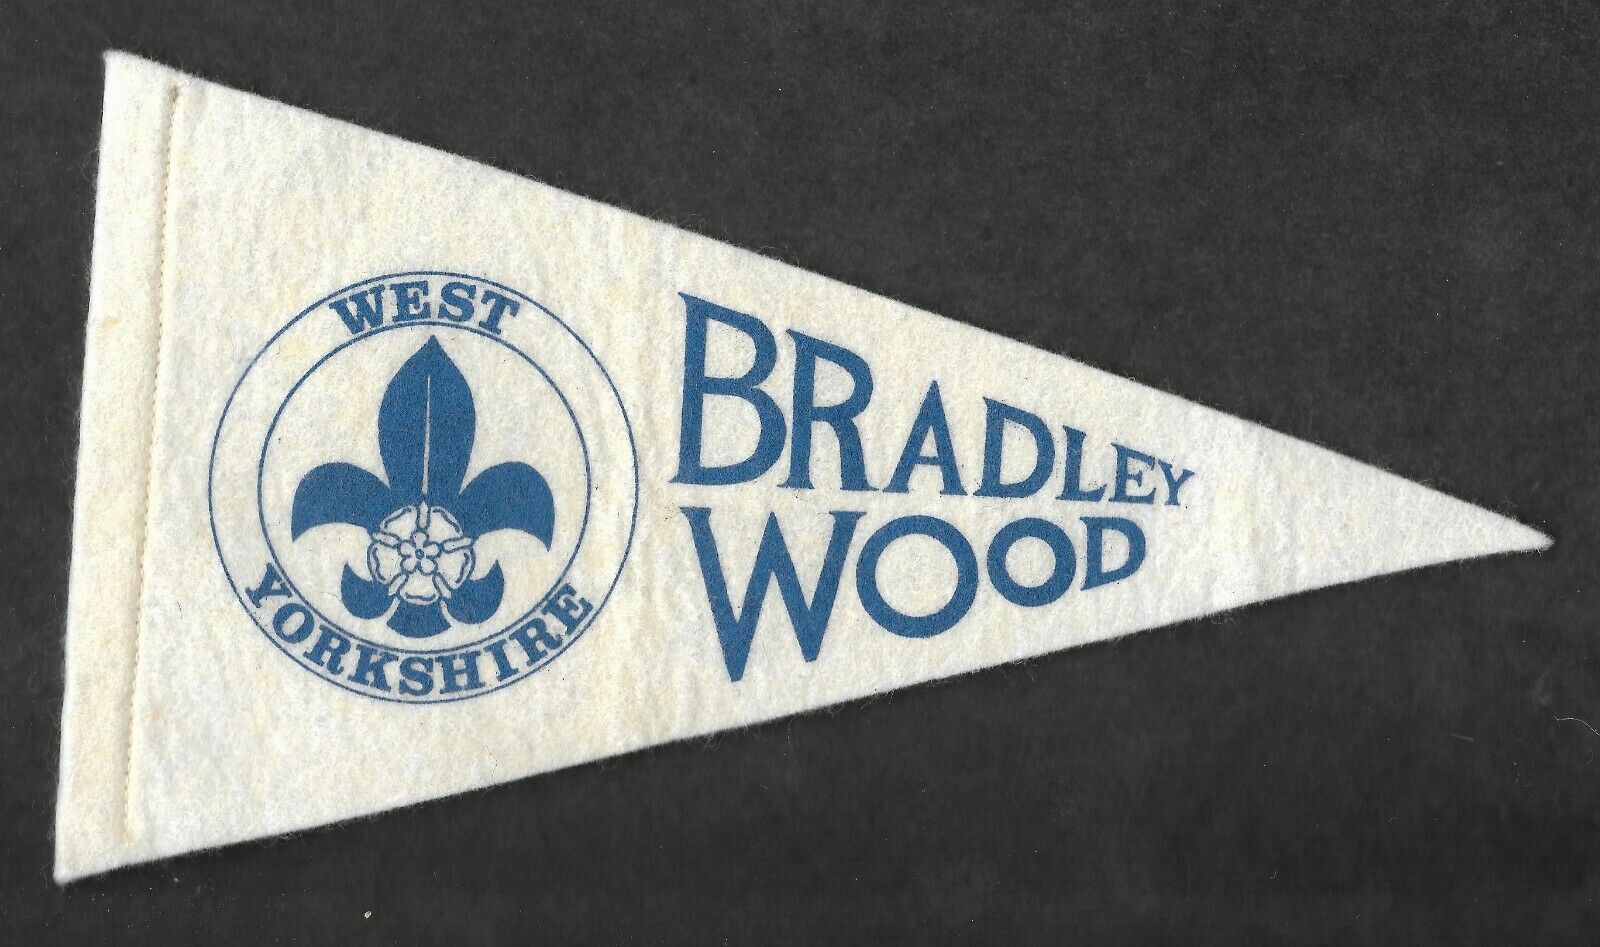 Pk68542:bradley Wood Boy Scout West Yorkshire Uk Pennant - Two Sided